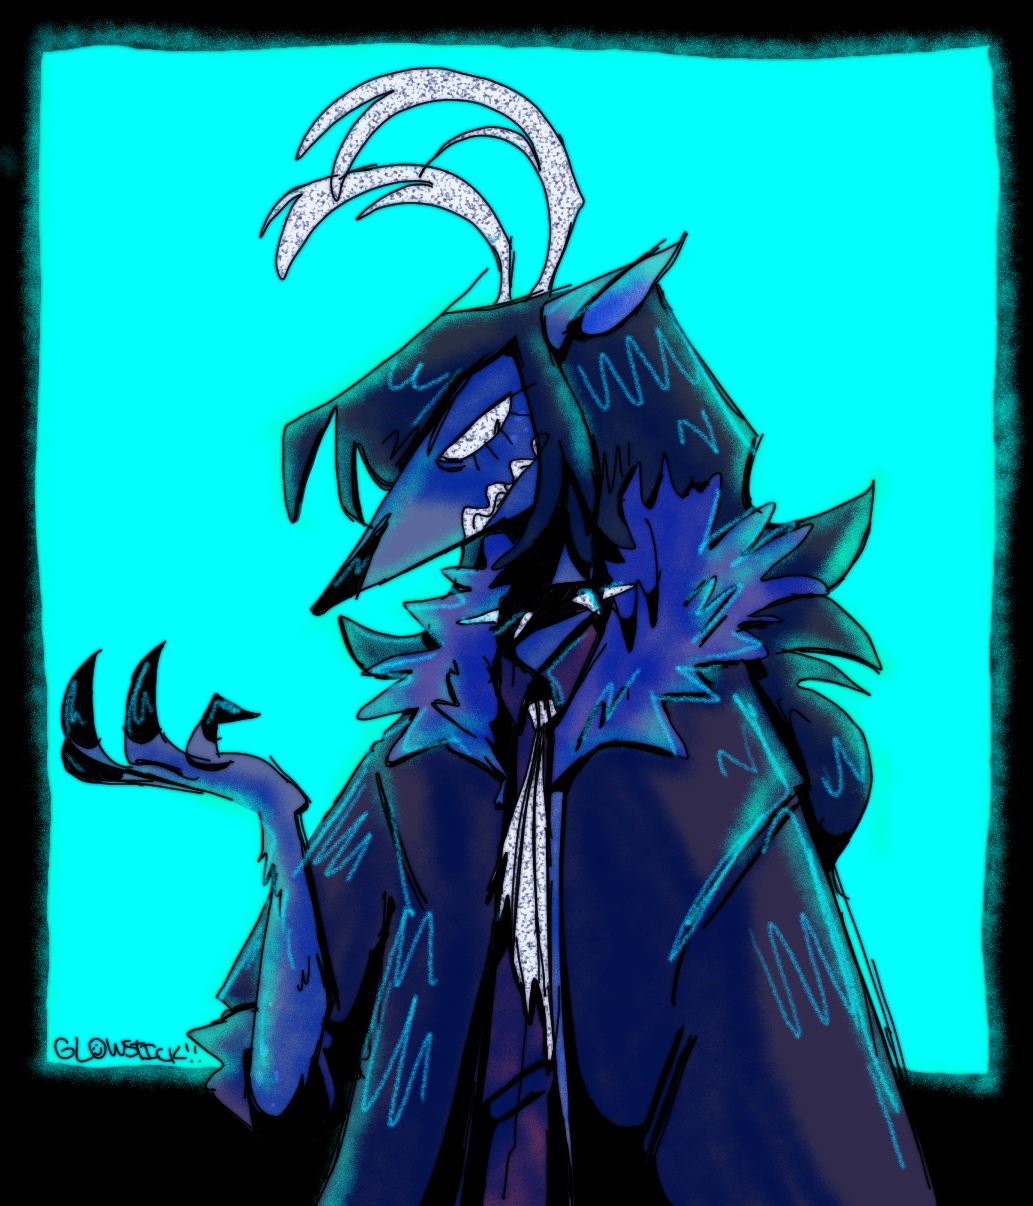 A digital drawing of Cyril, an anthropromorphic deer person, from the waist up. He is holding a hand up and is looking down with an angry expression. He has dark, fluffy hair and is wearing a parka. The background is a bright cyan block on top of solid black.